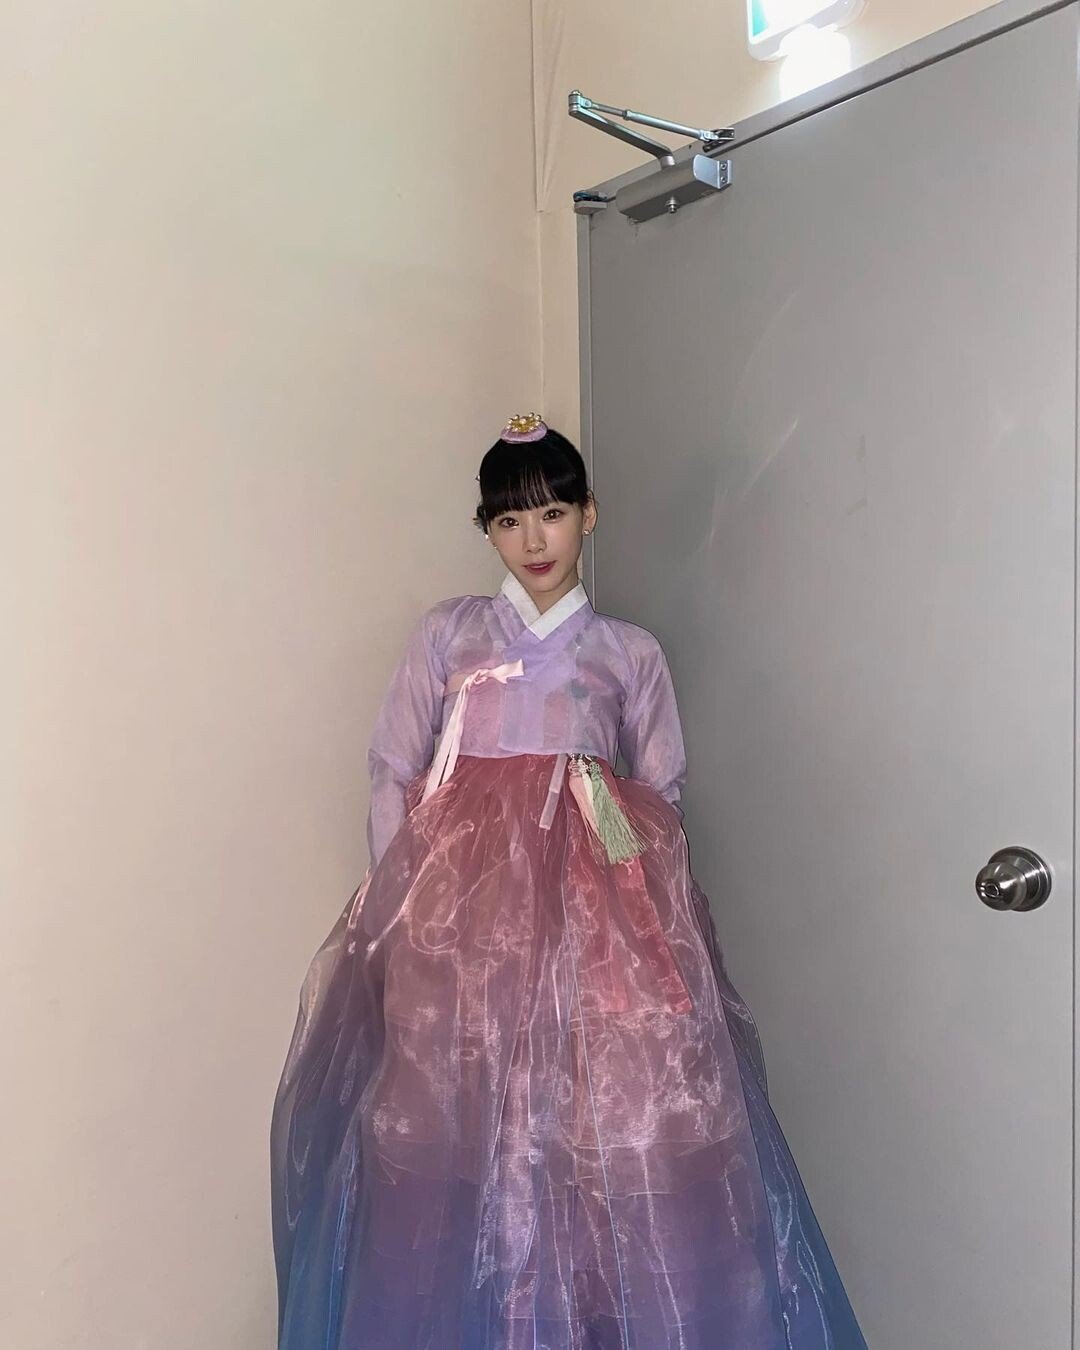 Taeyeon's Hanbok is all over the place.